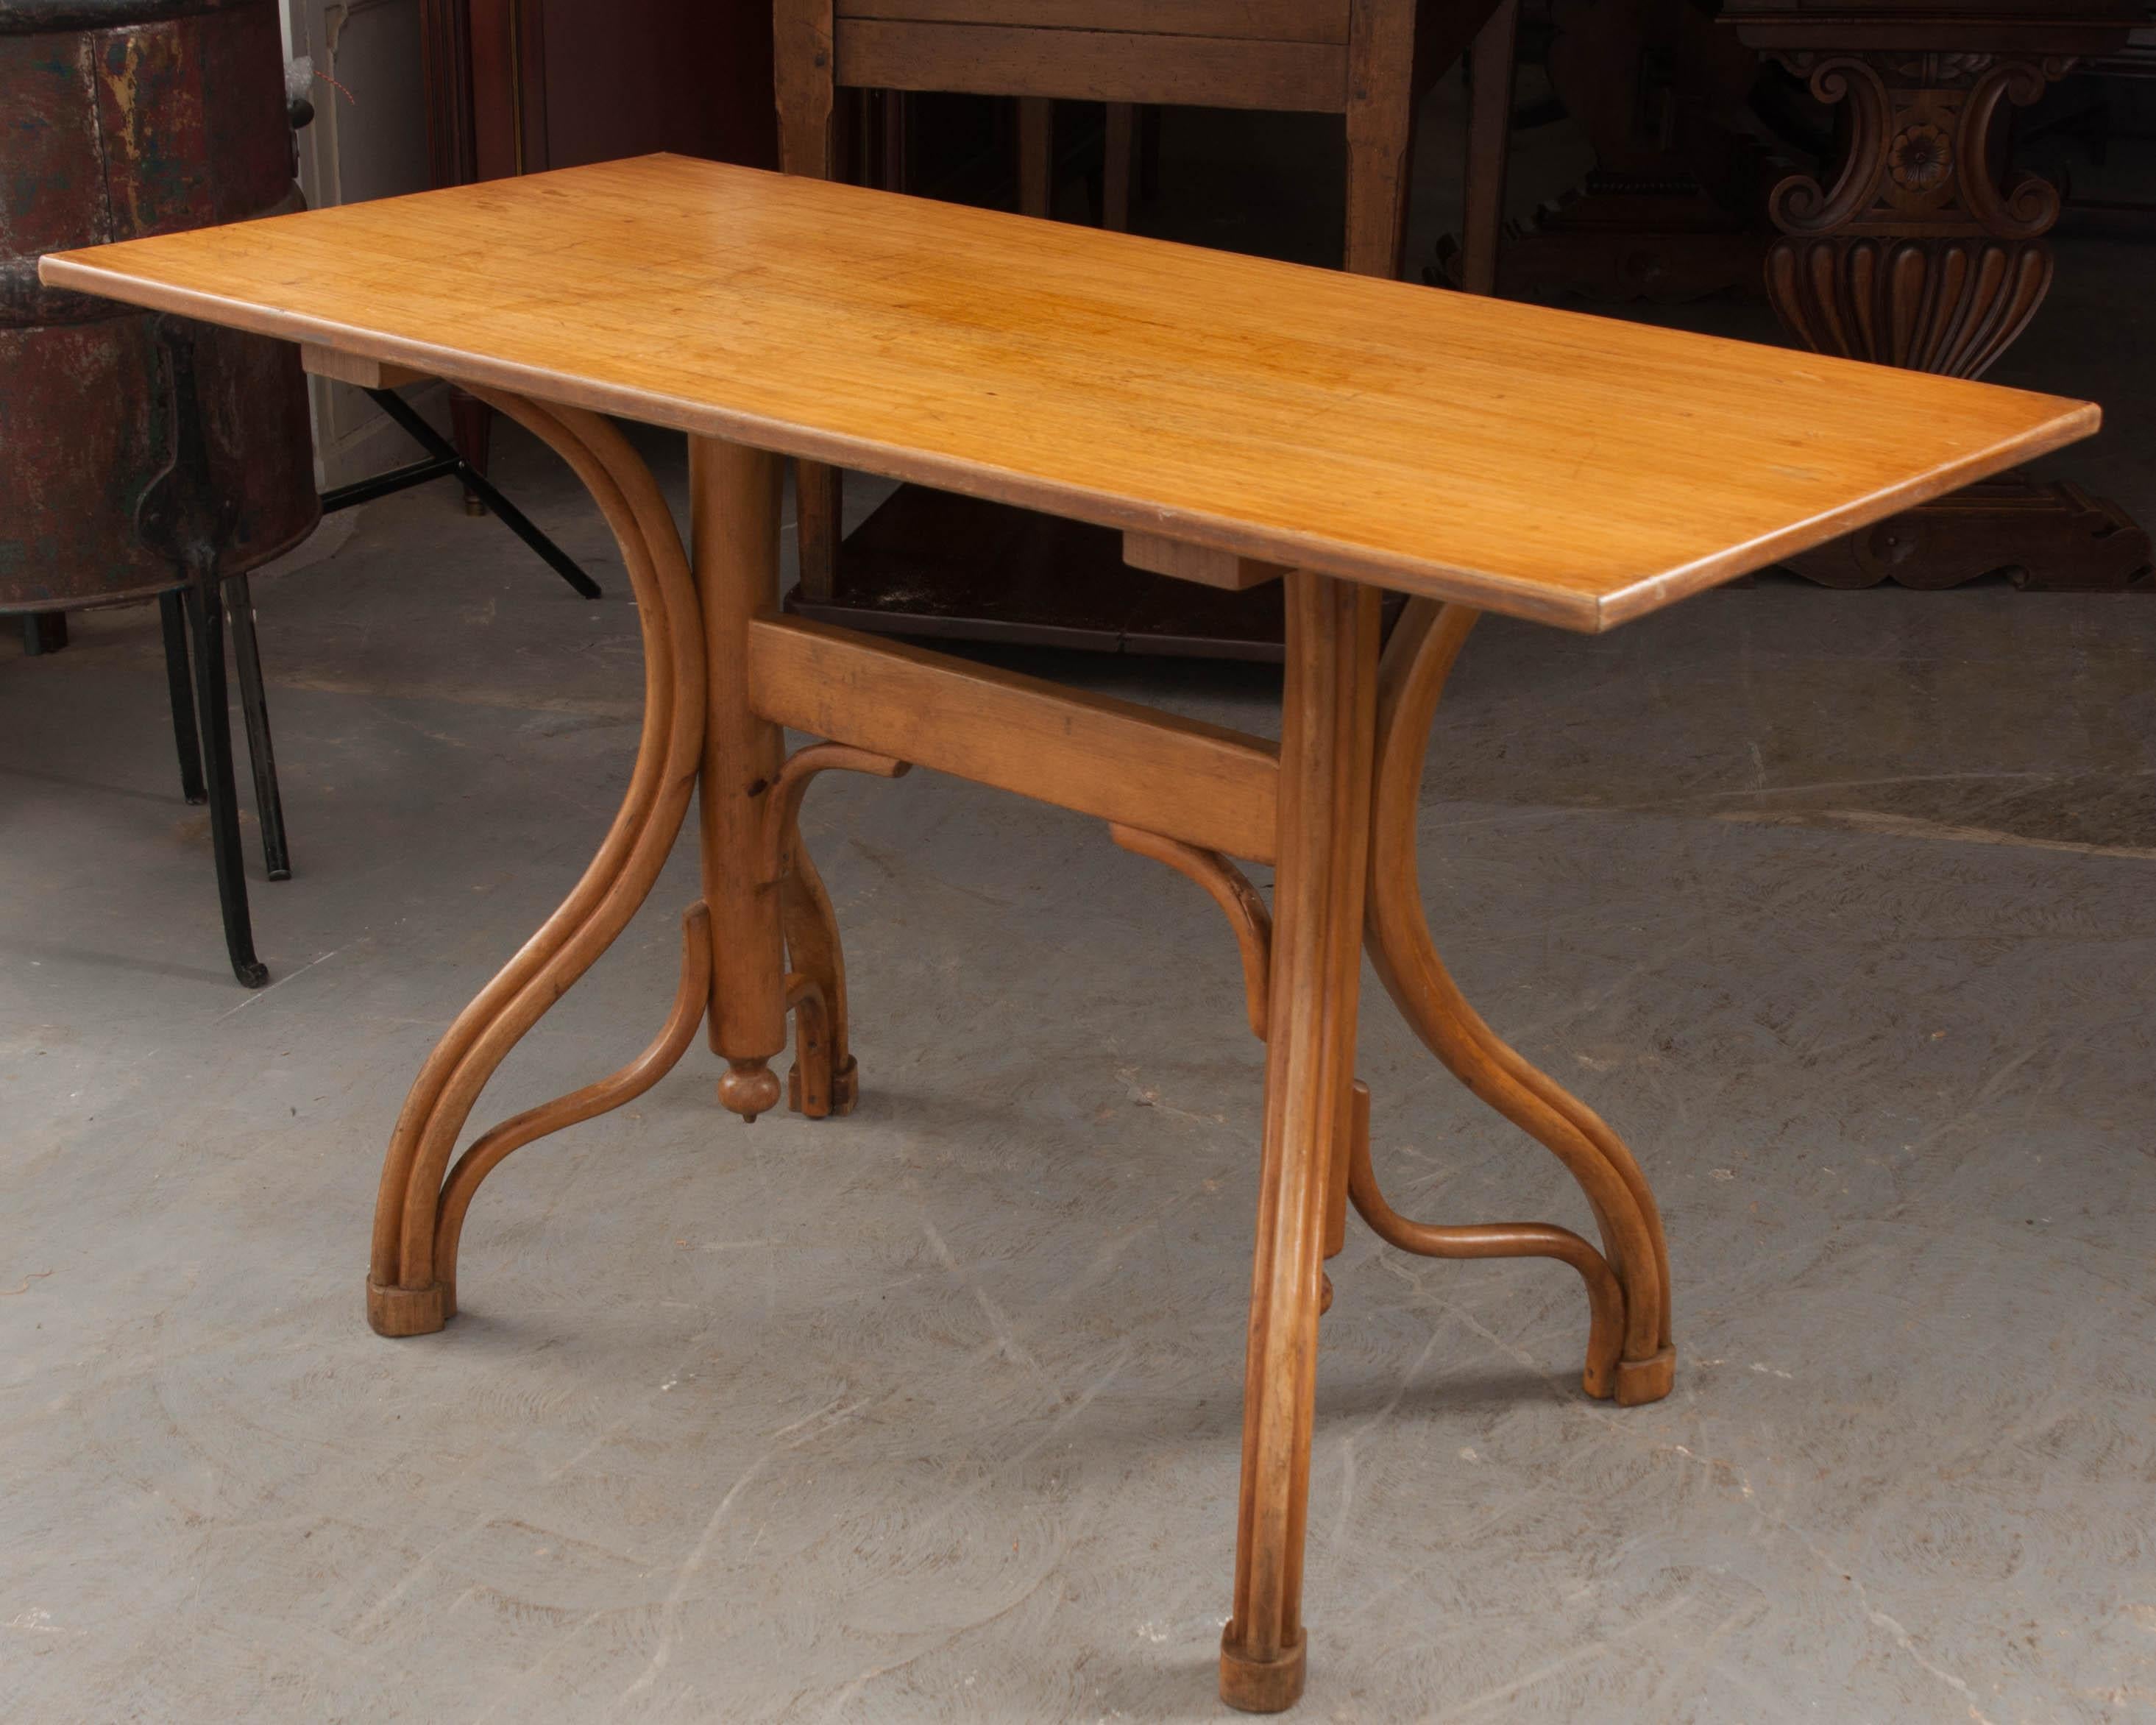 This excellent example of a French Art Nouveau pine bistro table, circa 1900, is of rectangular section and features elegant bentwood legs so quintessential to the period. In addition to working well as a small dining table, it would be a fantastic